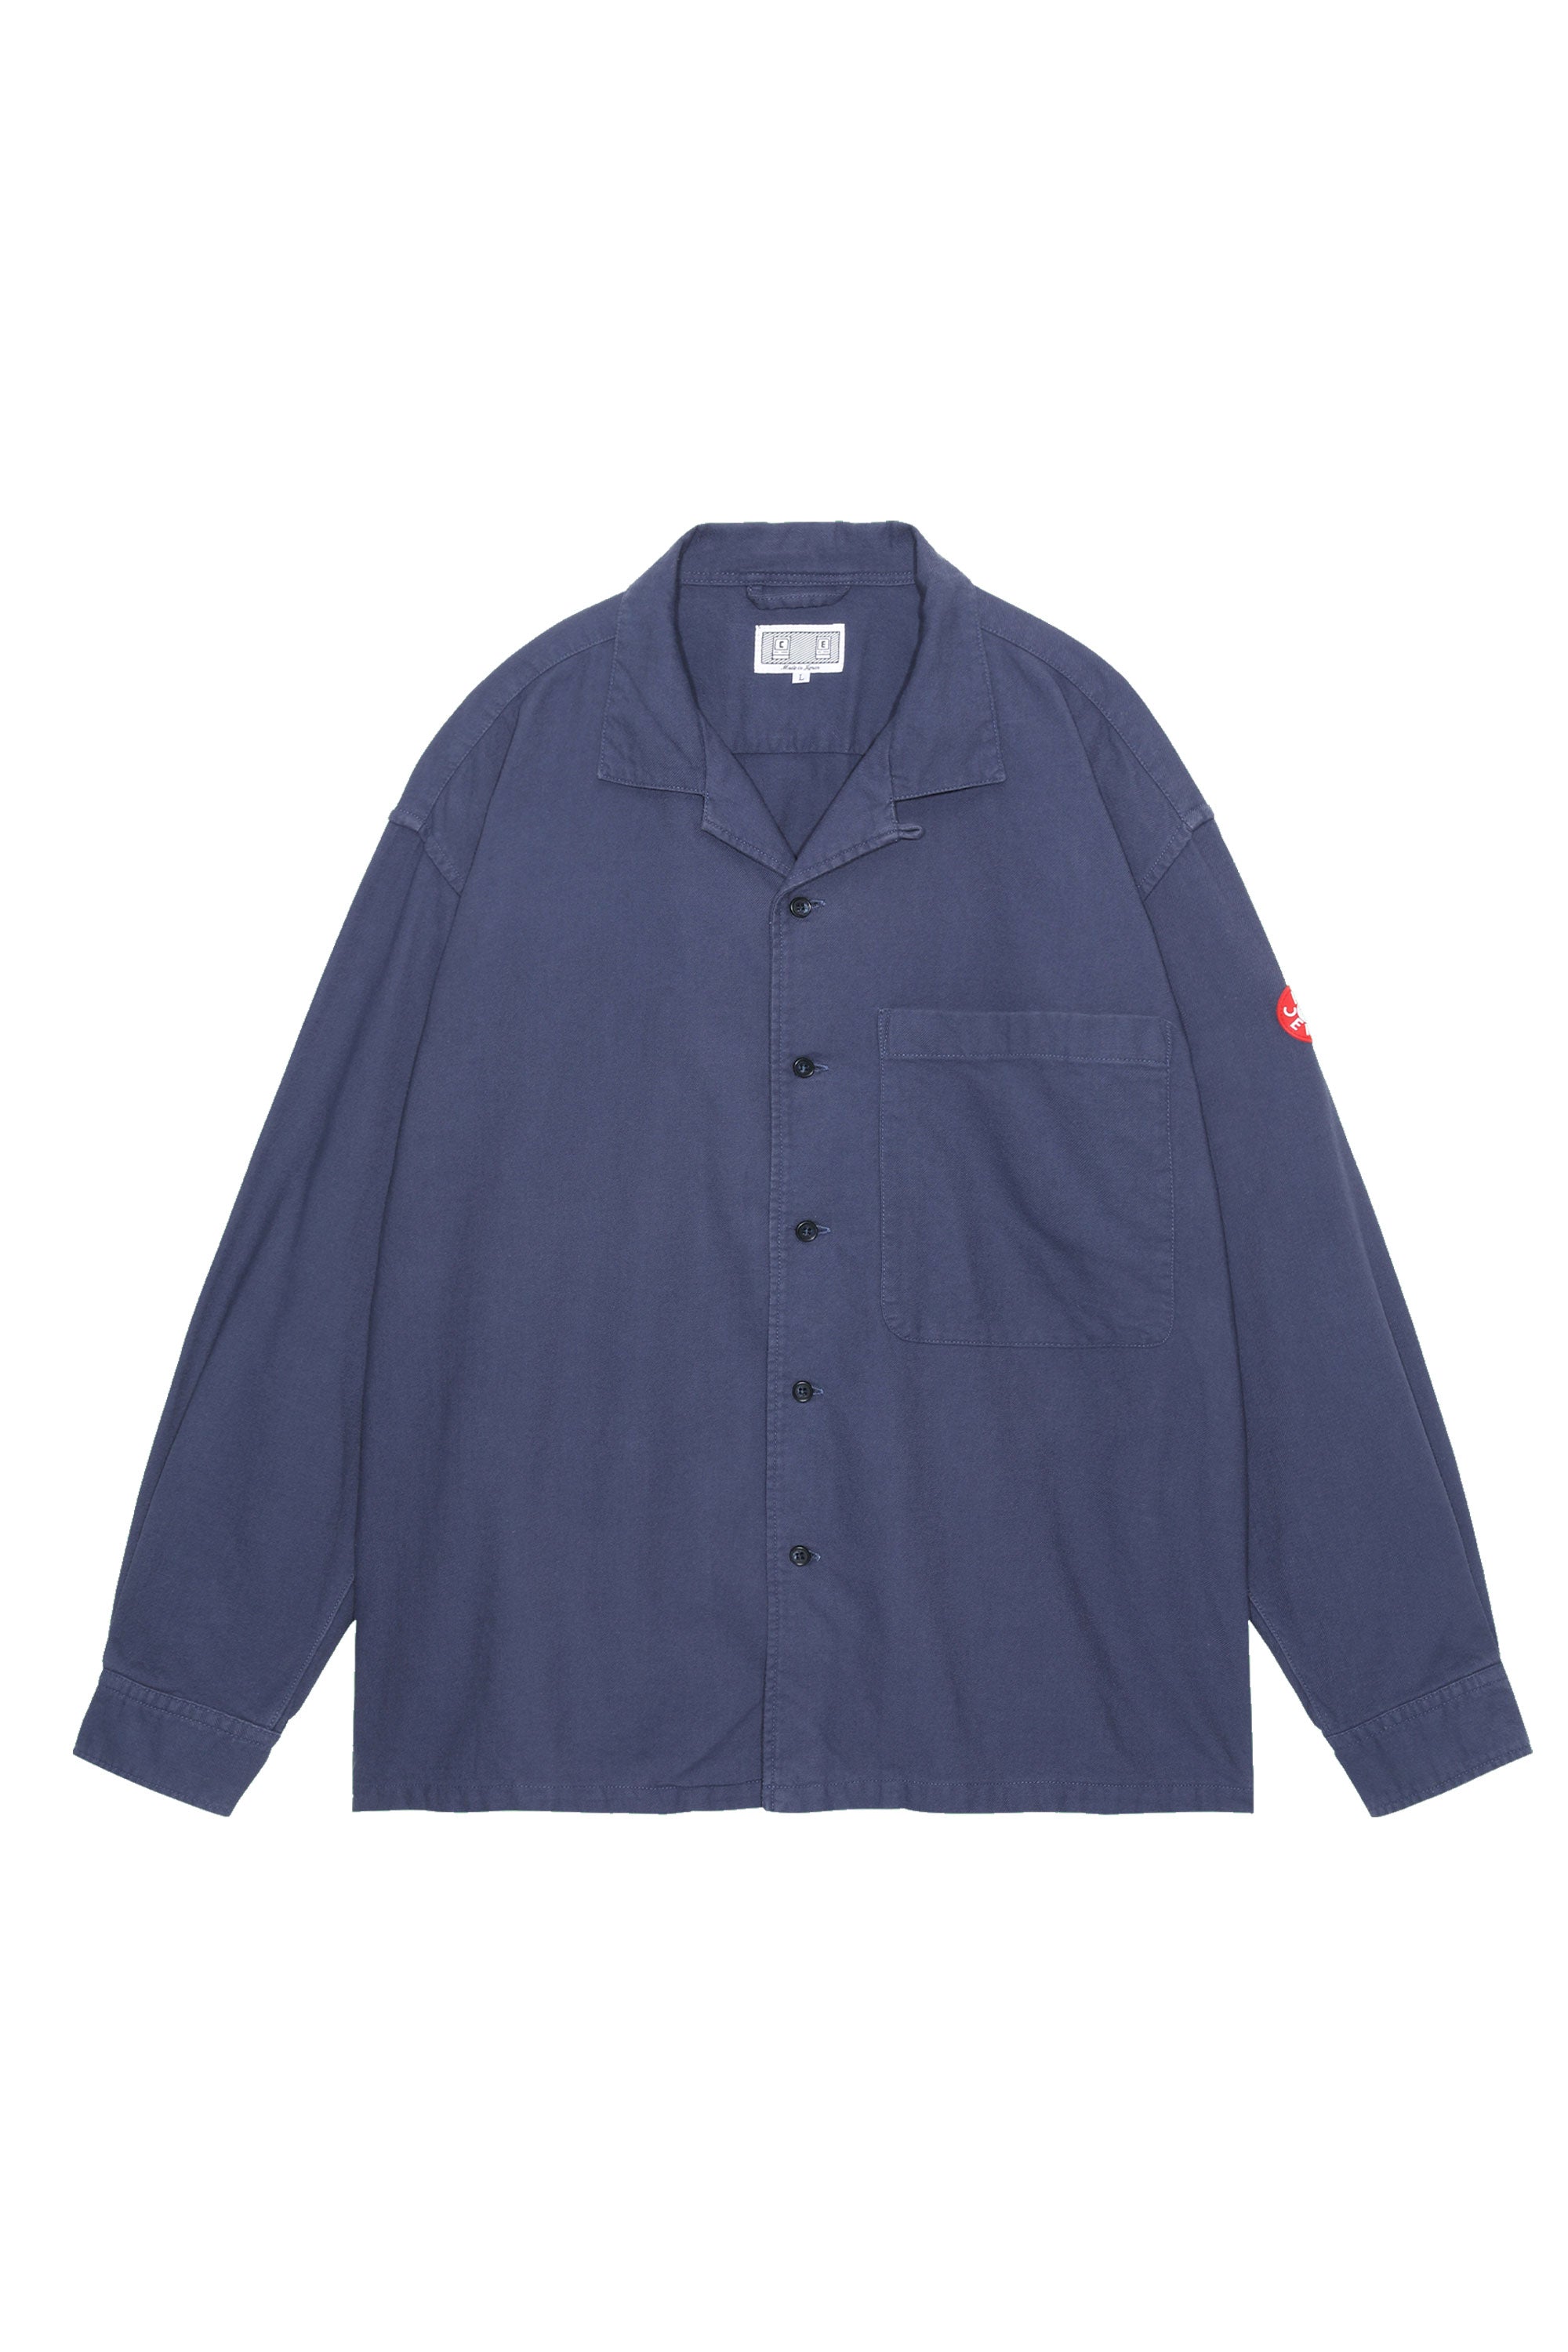 The CAV EMPT - COTTON LPOC OPEN SHIRT  available online with global shipping, and in PAM Stores Melbourne and Sydney.